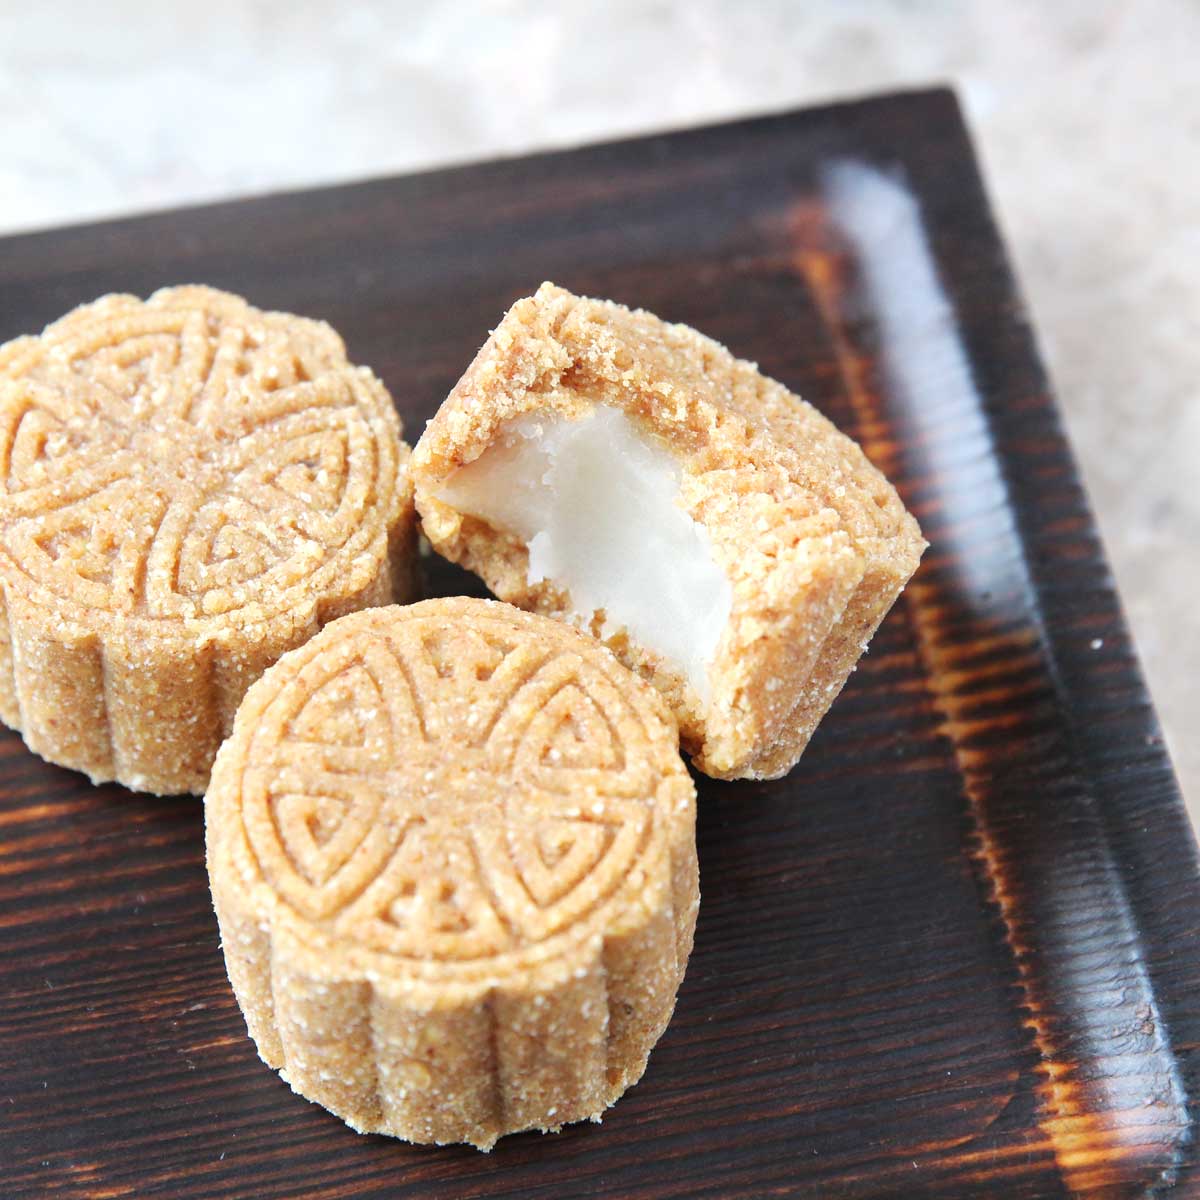 How to Make Chickpea Mooncakes (Vegan, Gluten-Free, High in Protein) - cashew butter mooncakes